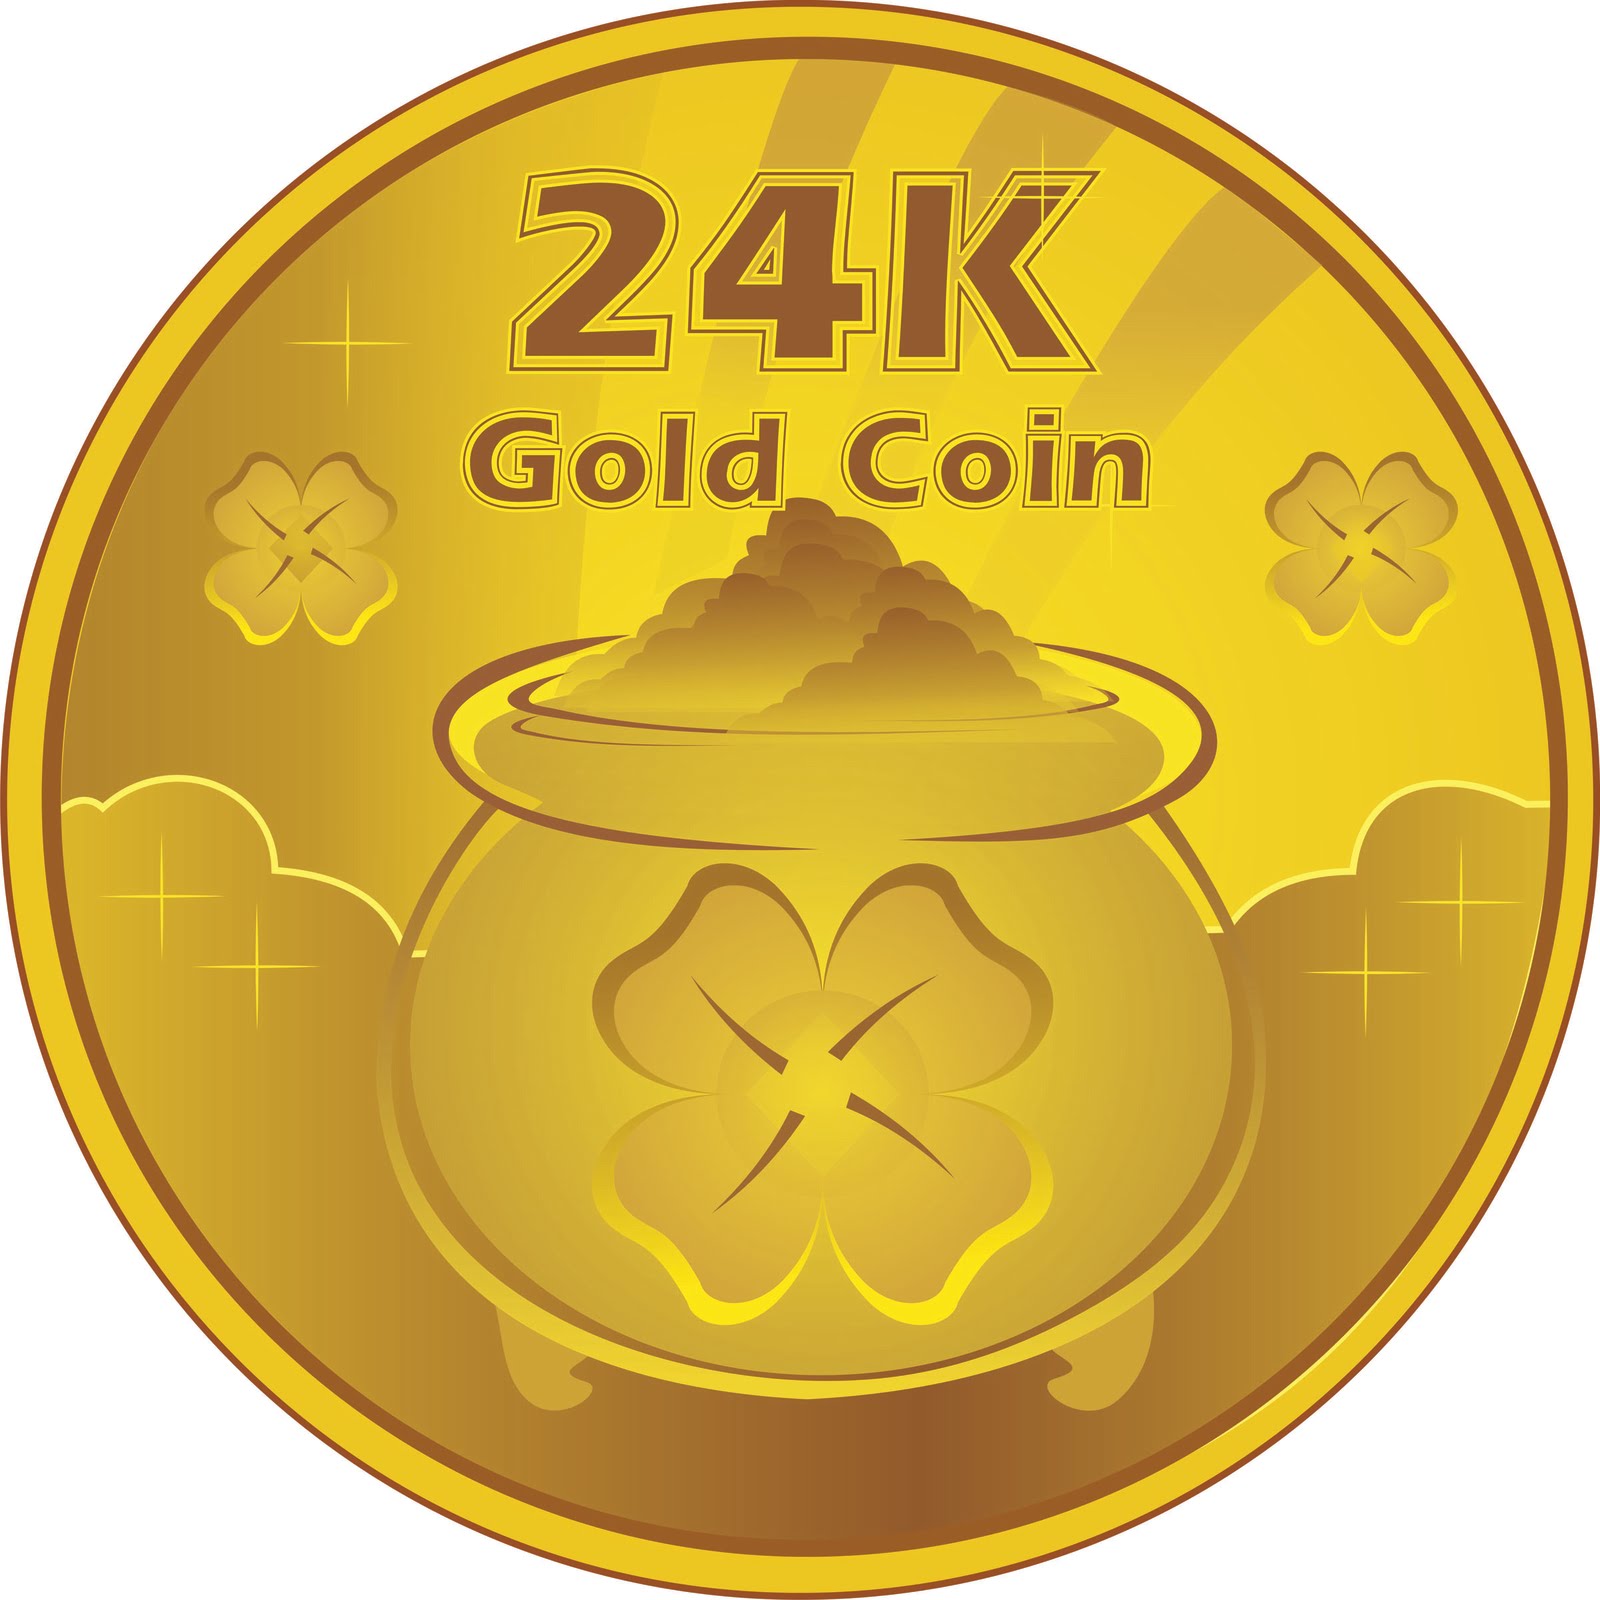 Gold Coin Pictures - Cliparts.co